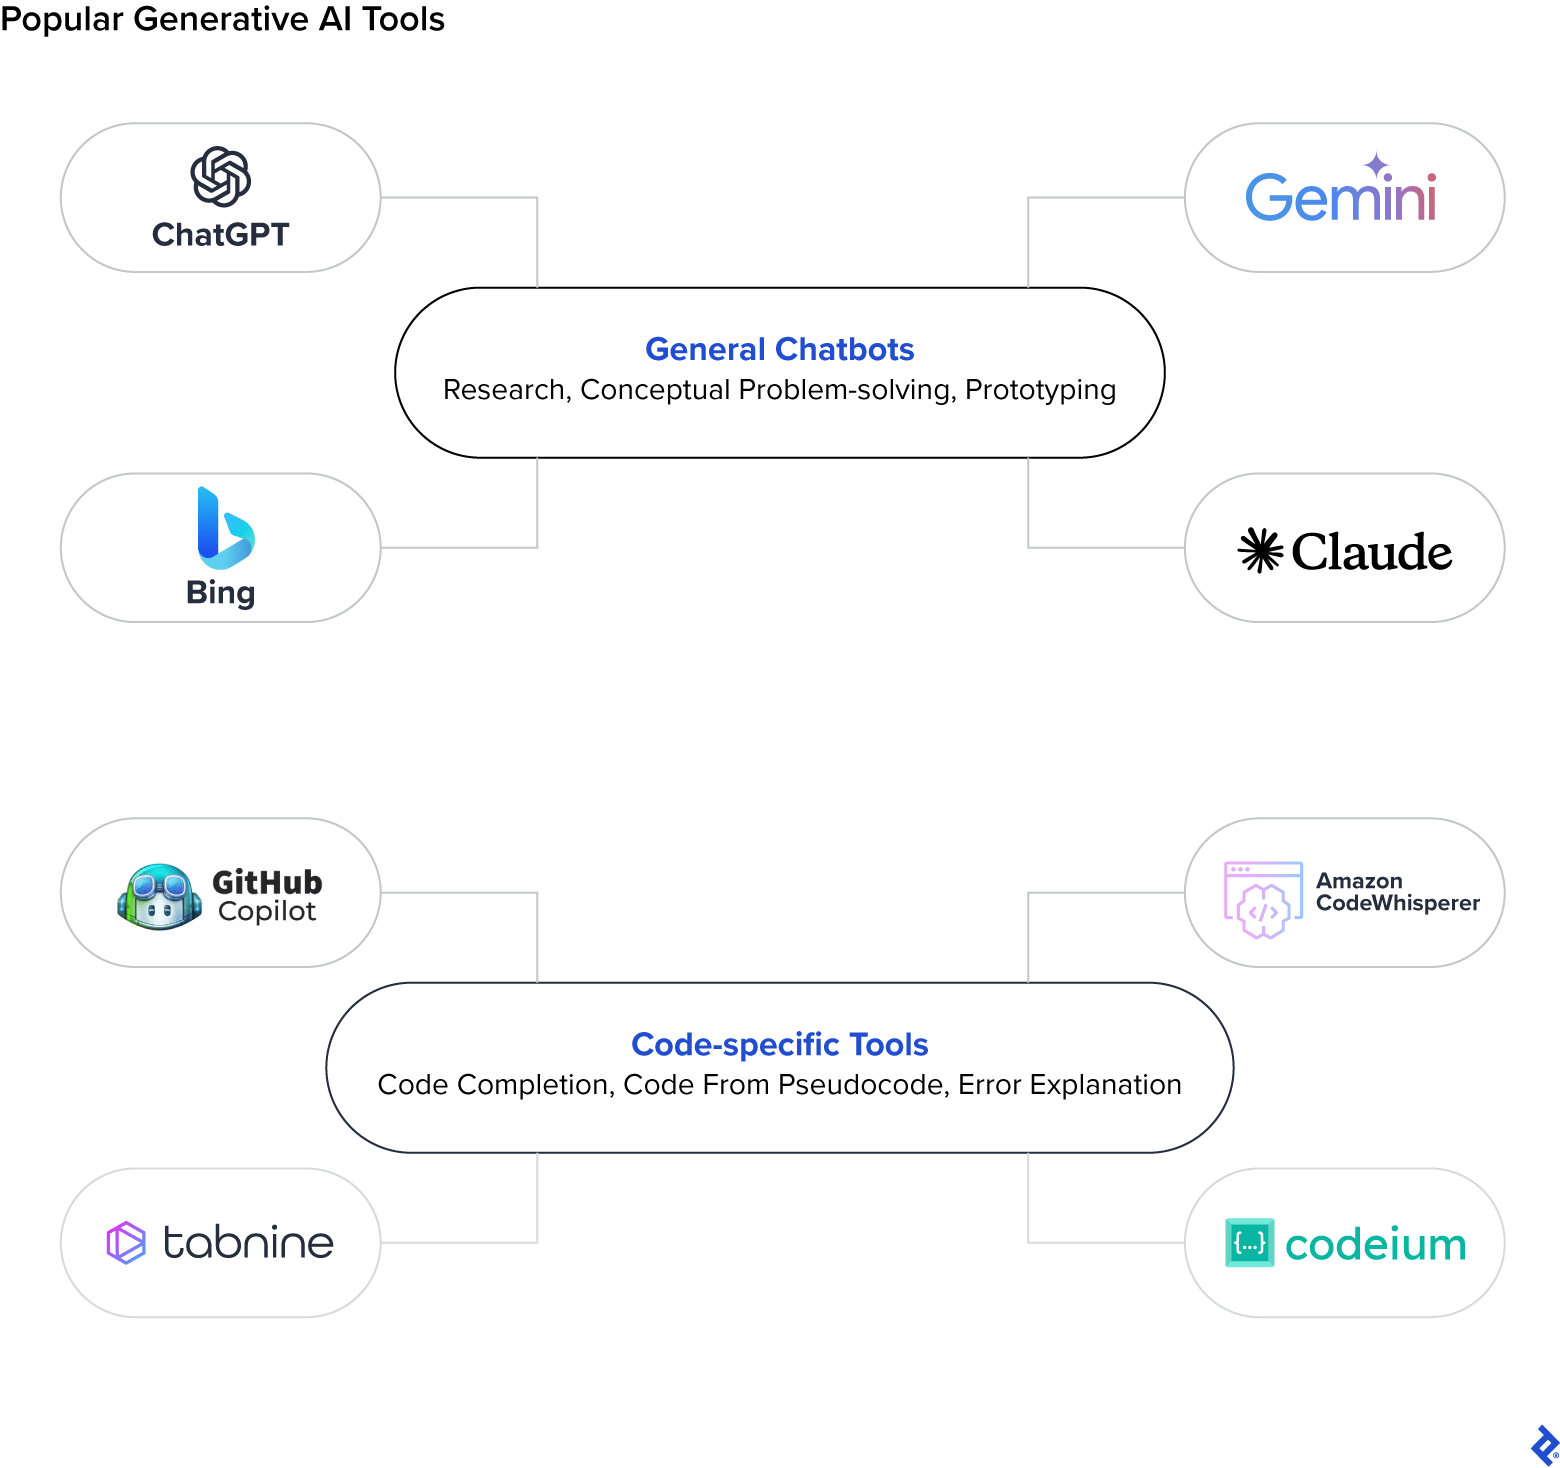 Popular Gen AI tools for developers categorized as “General Chatbots” (like ChatGPT and Bing) or “Code-specific Tools” (like Copilot and Codeium).